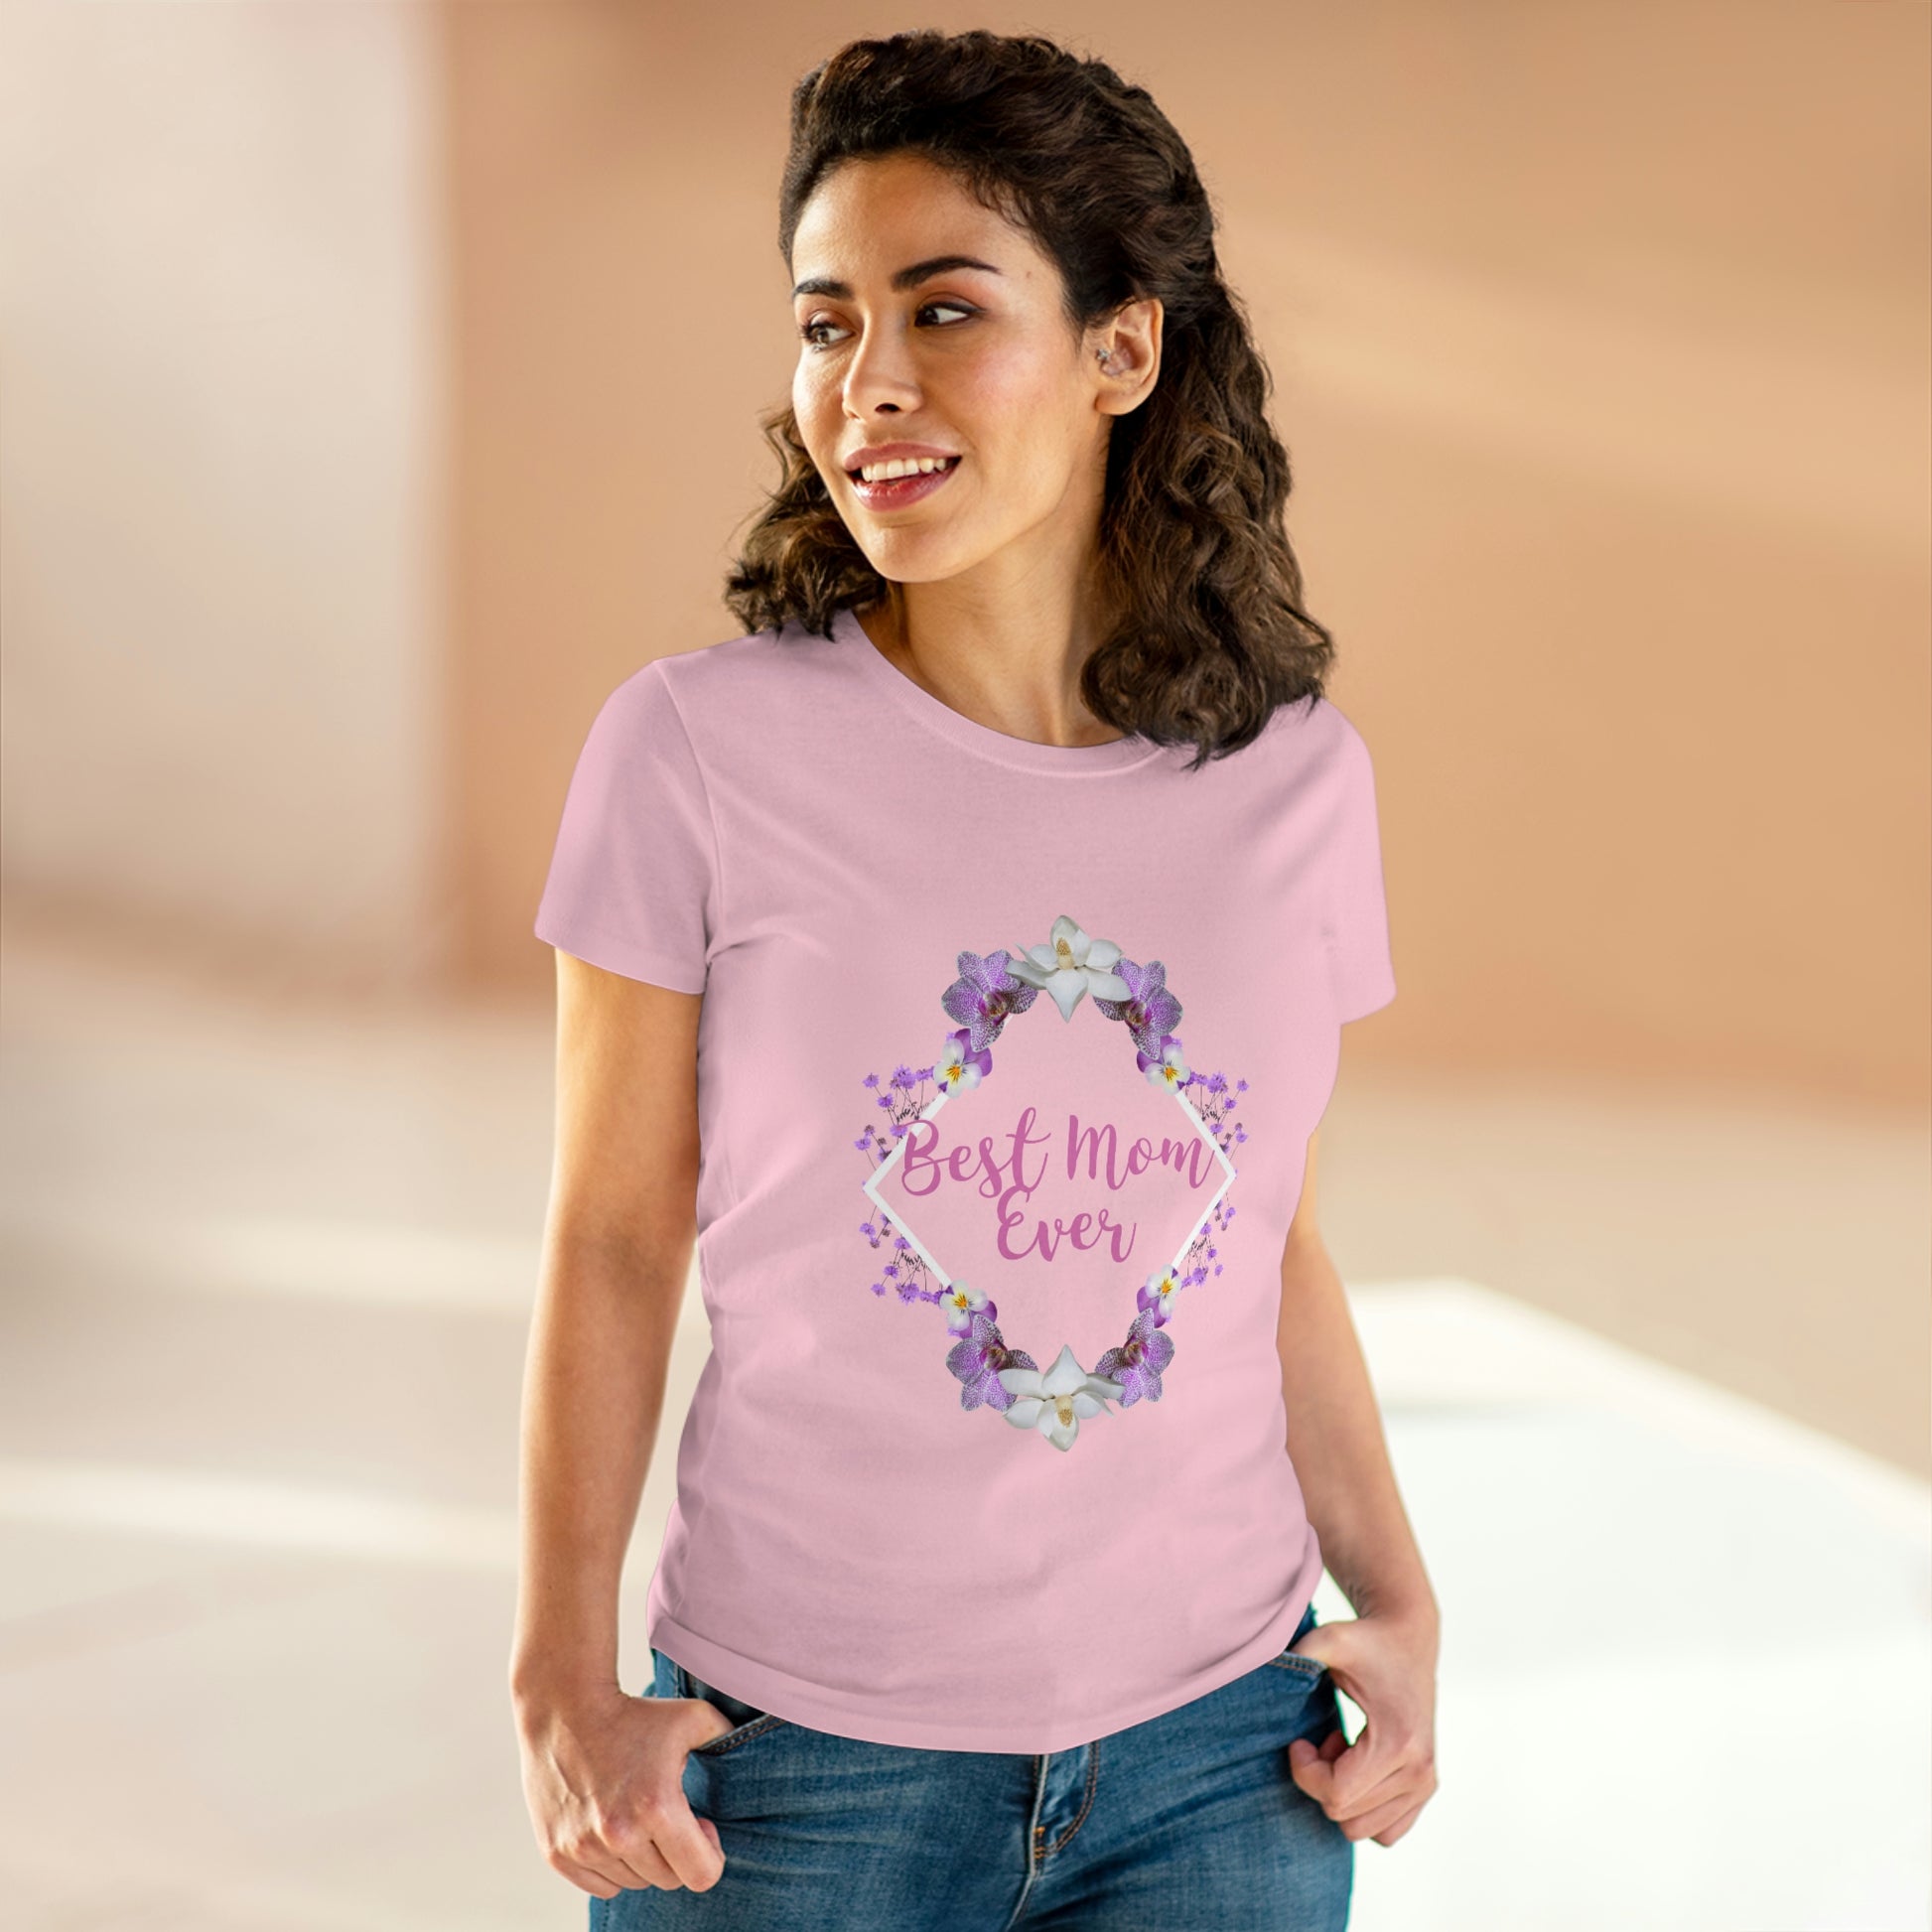 Mock up of dark-haired woman wearing our pink shirt